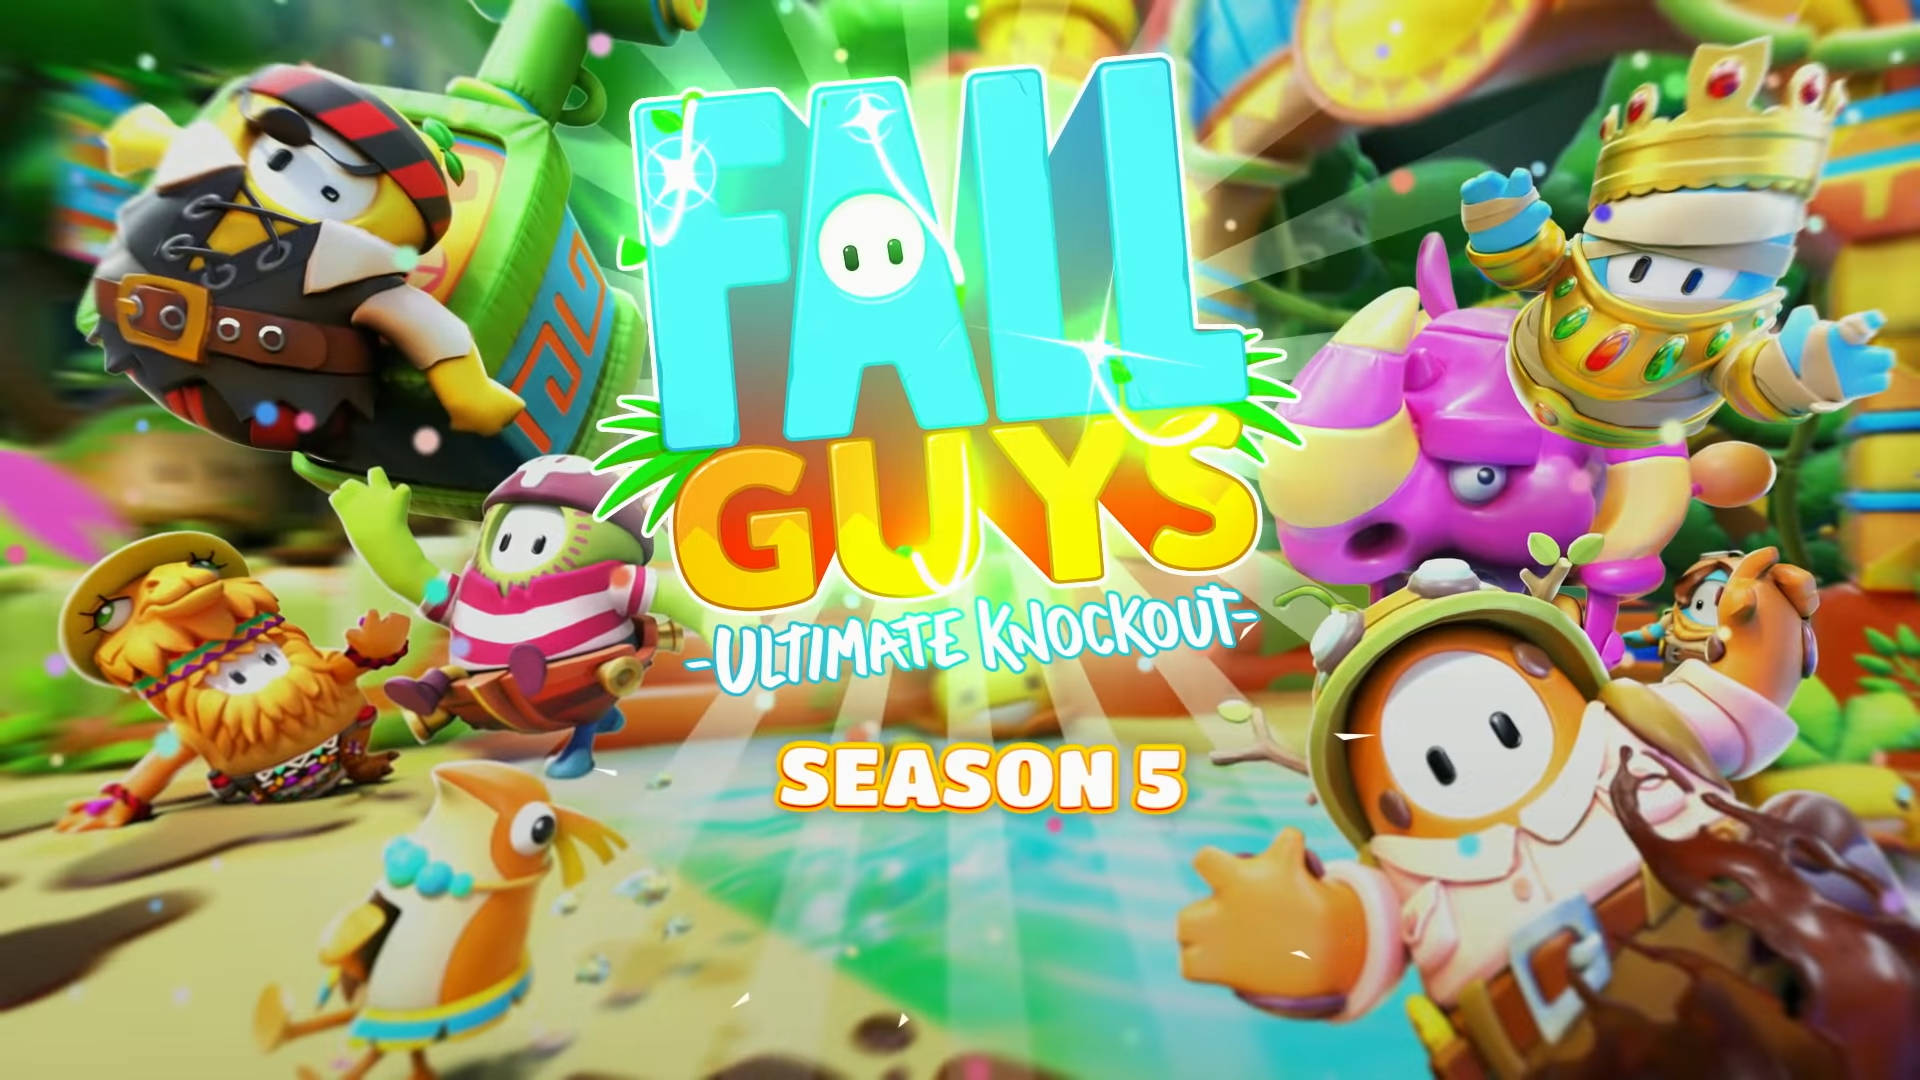 Fall Guys Ultimate Knockout Season 5 Game Poster